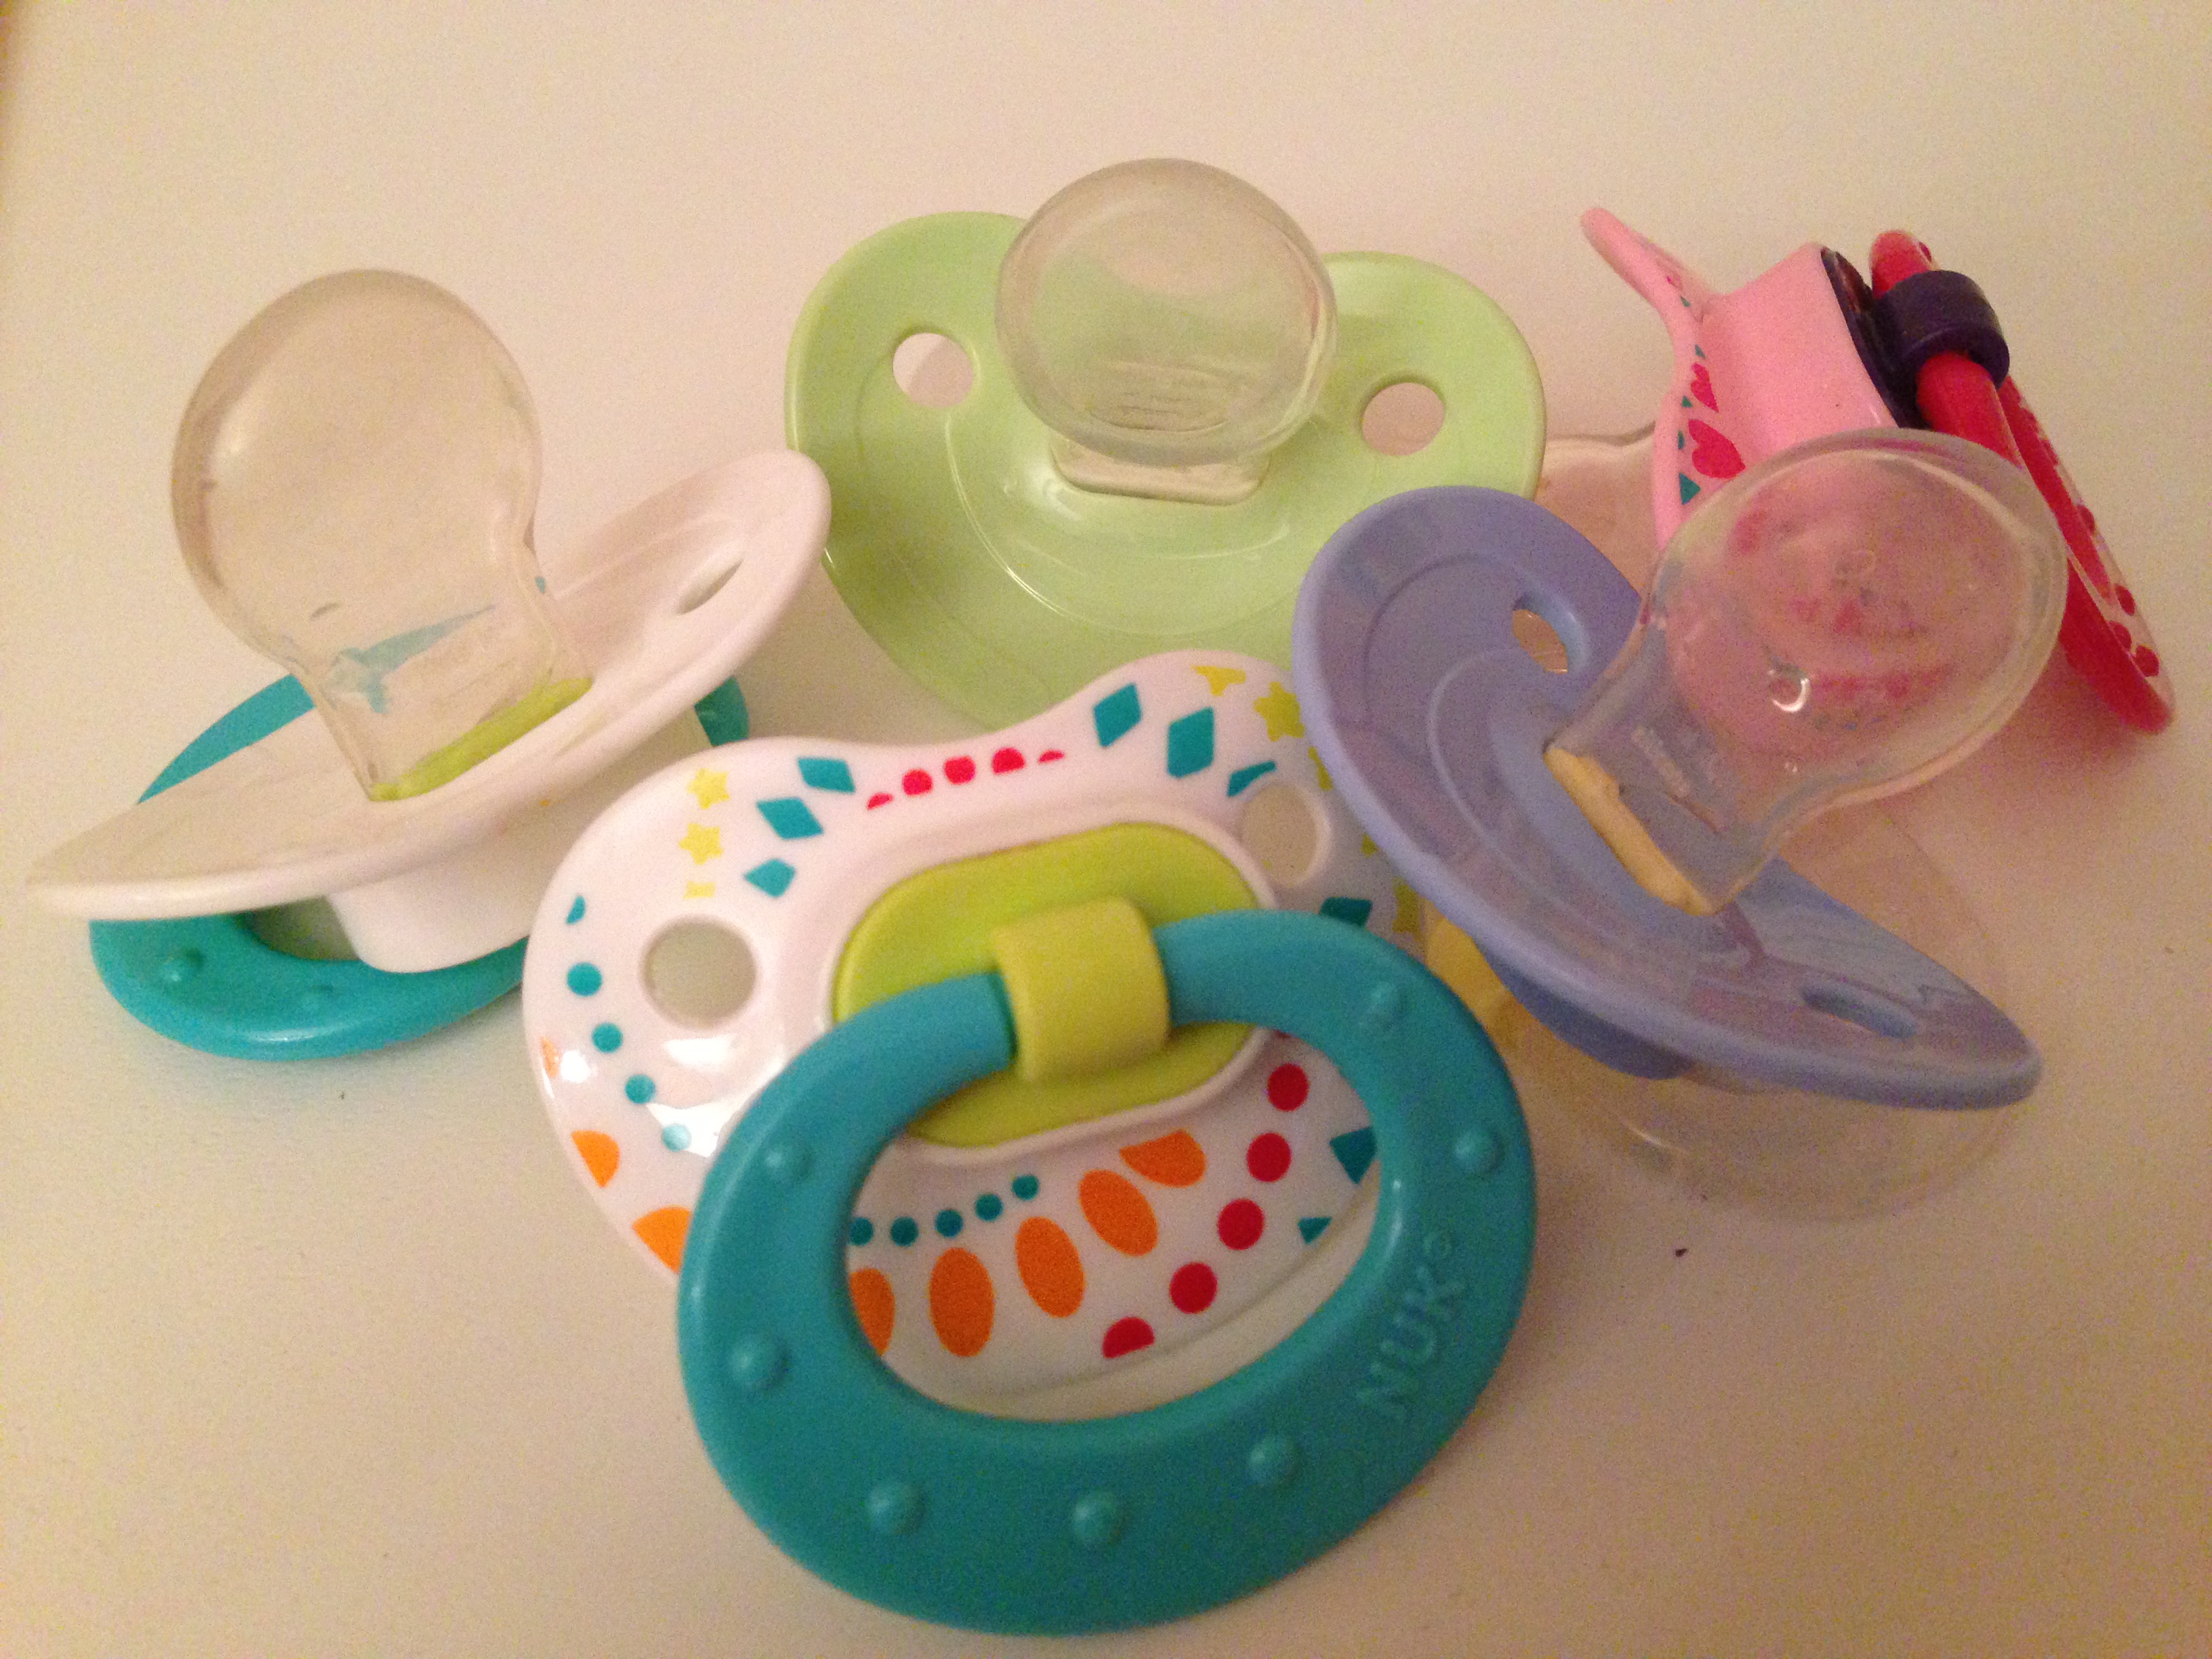 baby gift products